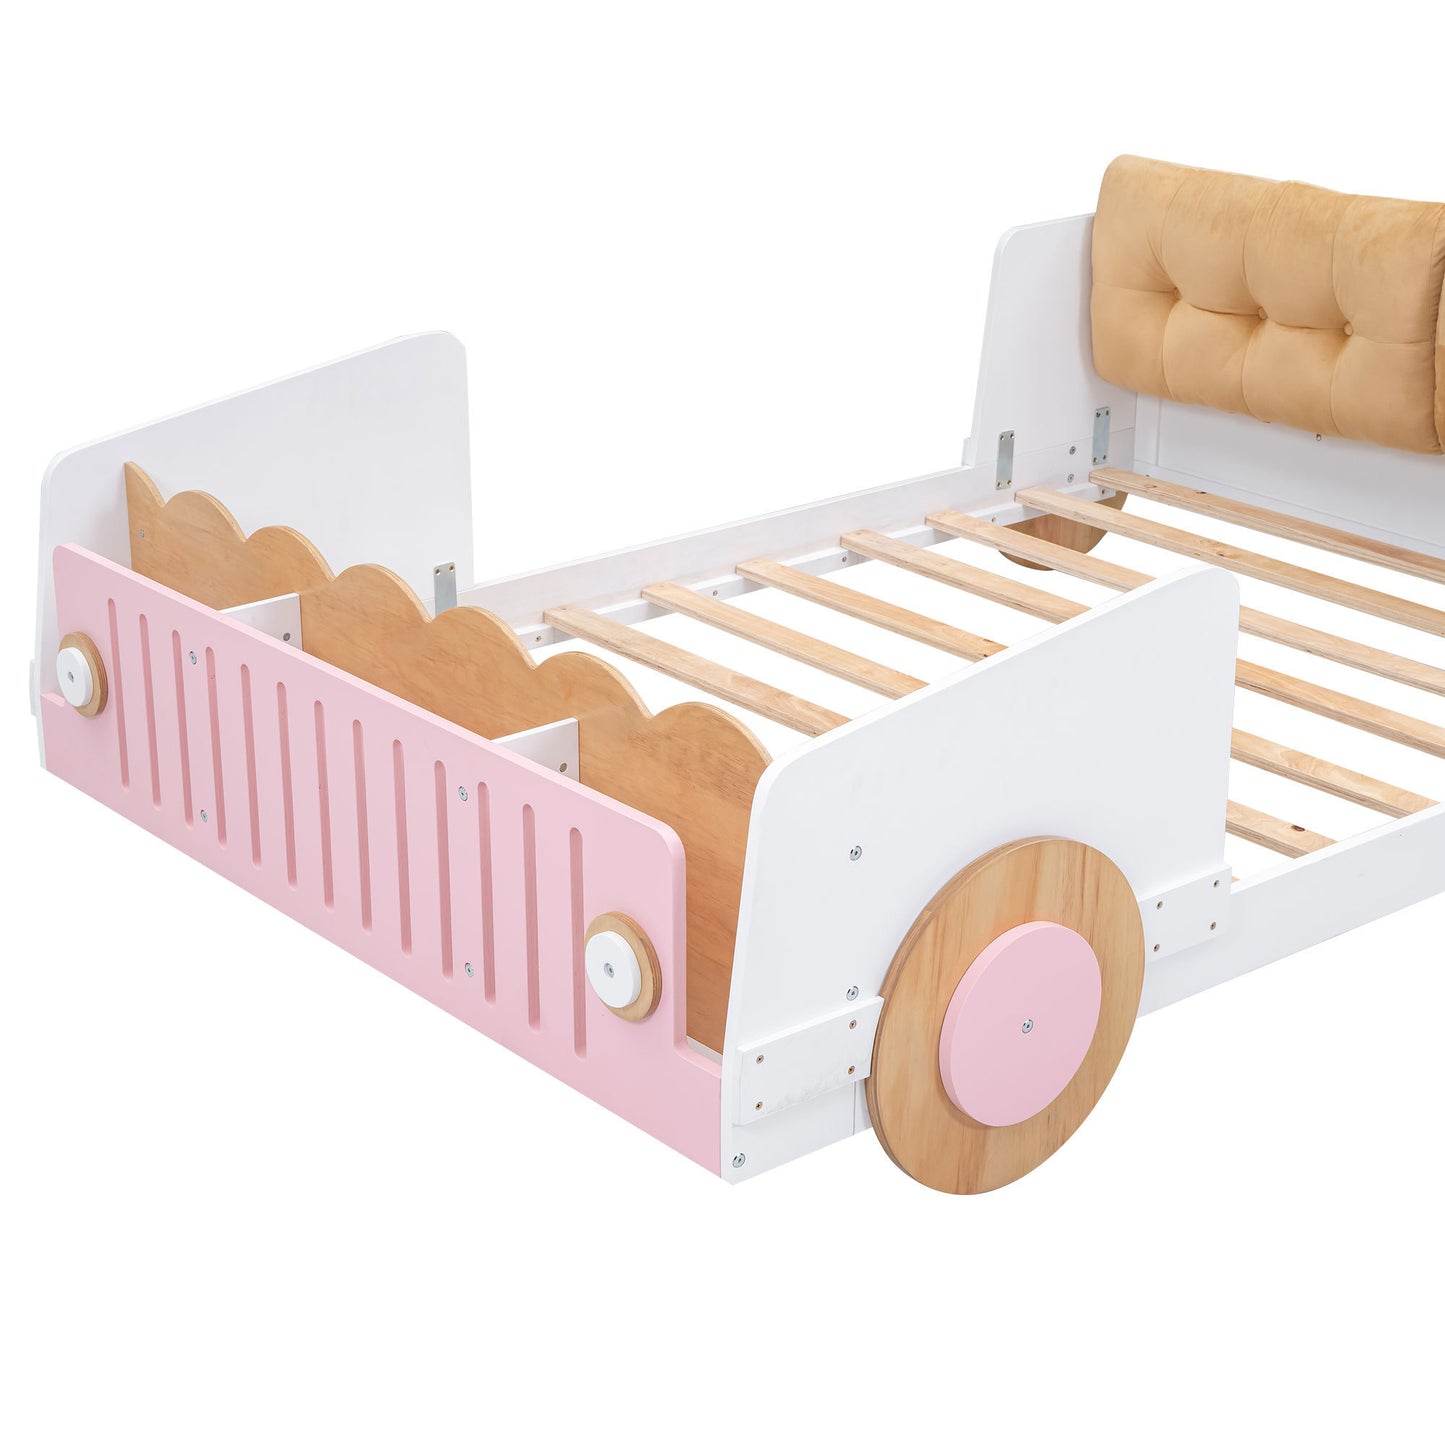 Full size Car-shaped platform bed with Soft cushion and shelves on the footboard, White